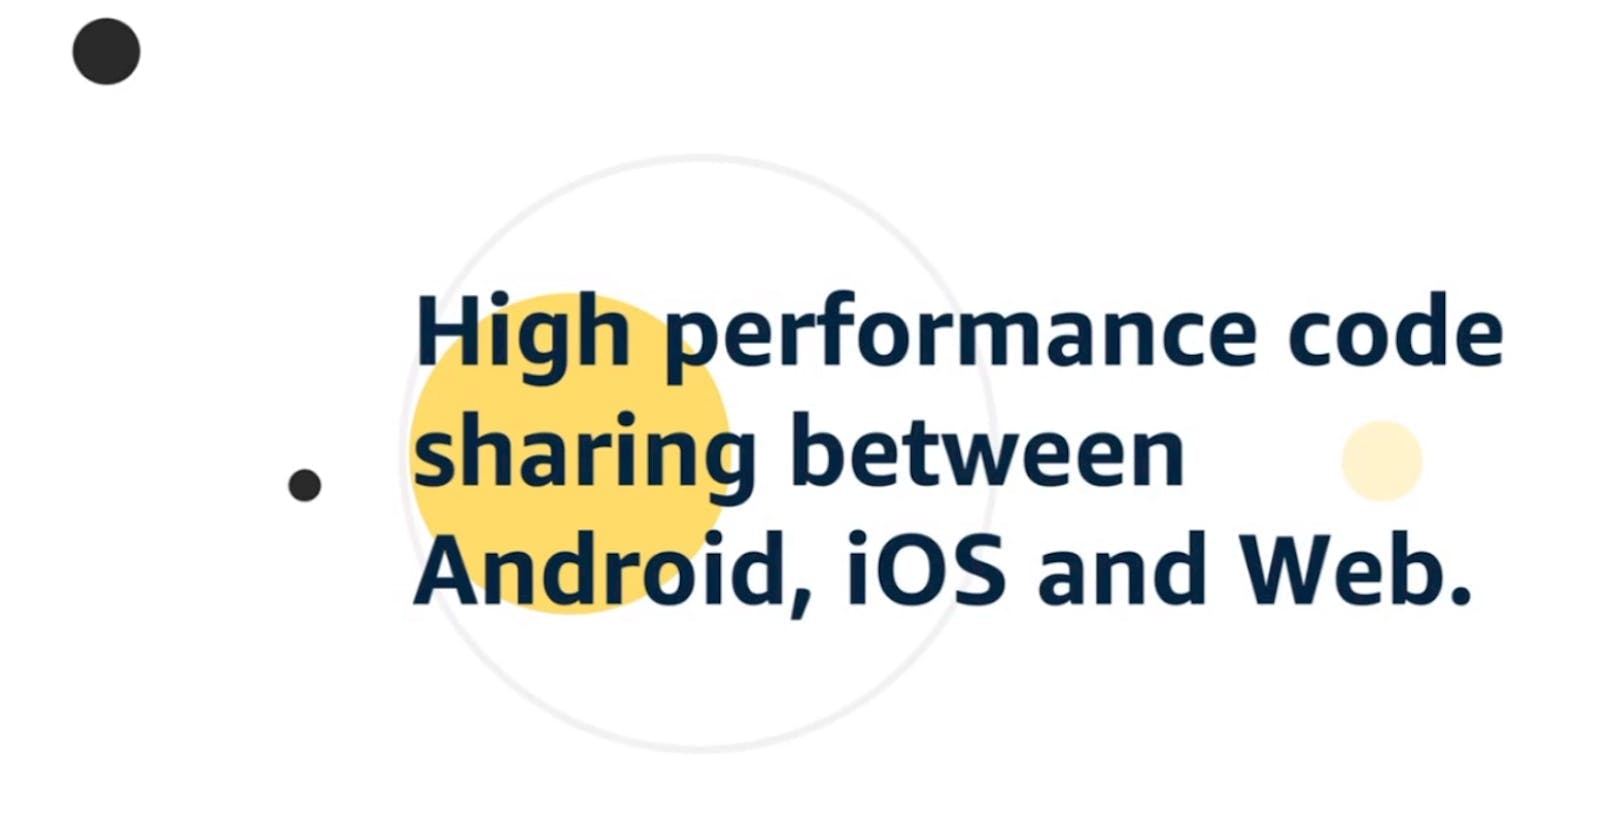 High performance code sharing between Android, iOS and Web